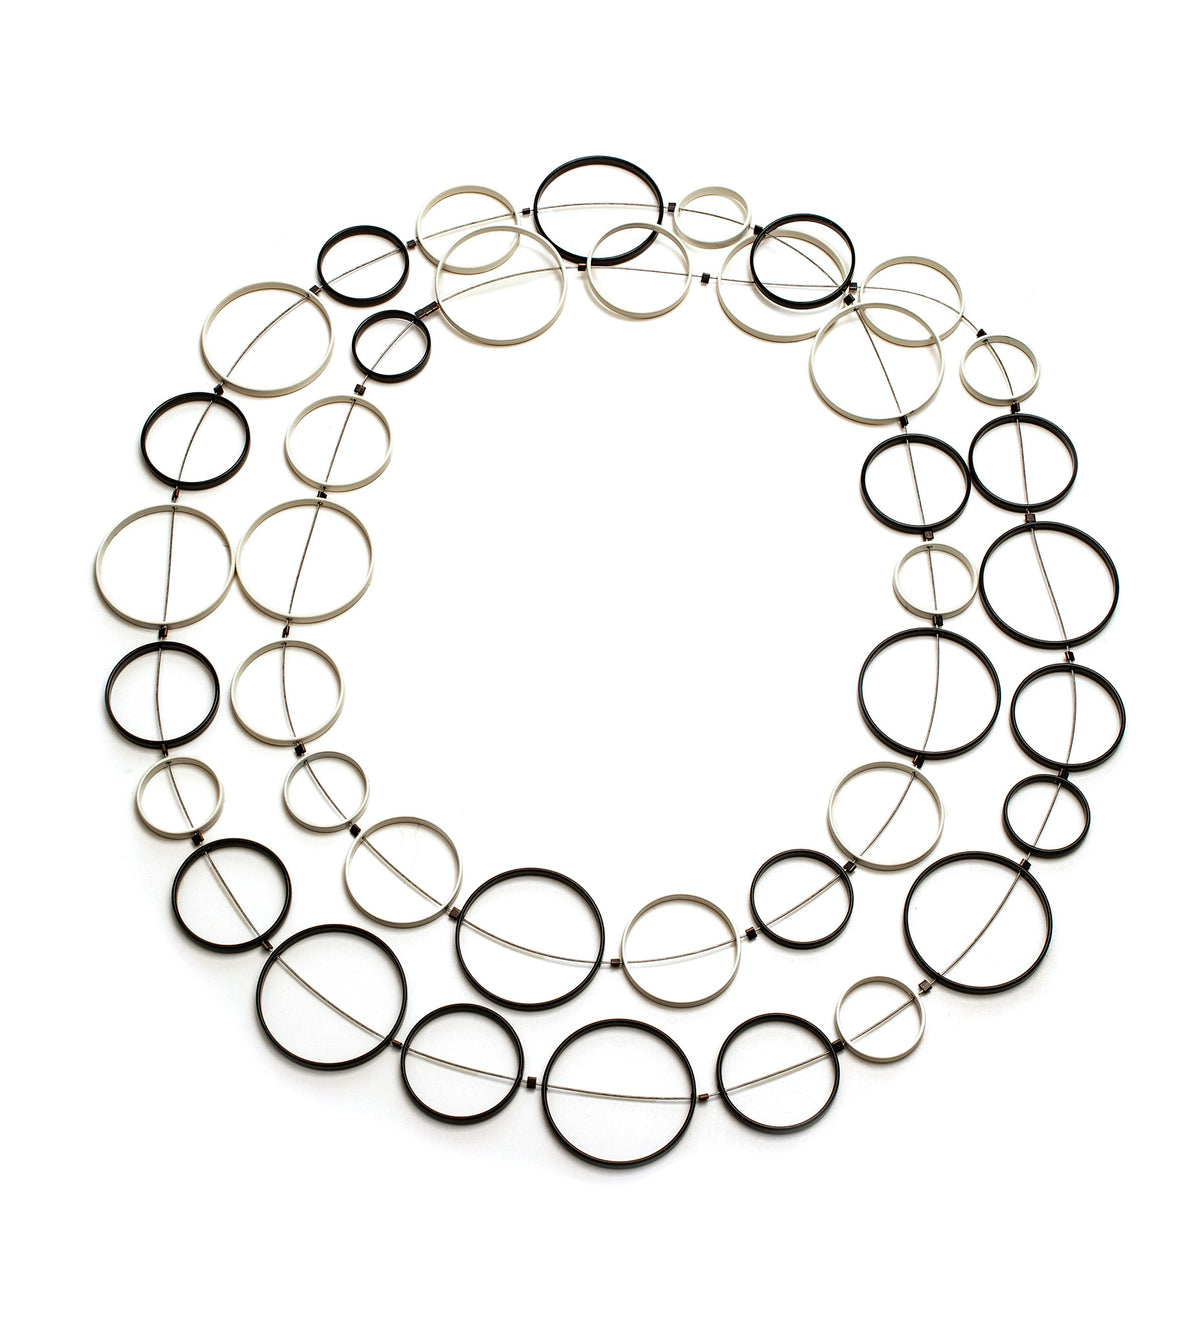 Black and White Circle Necklace 48"